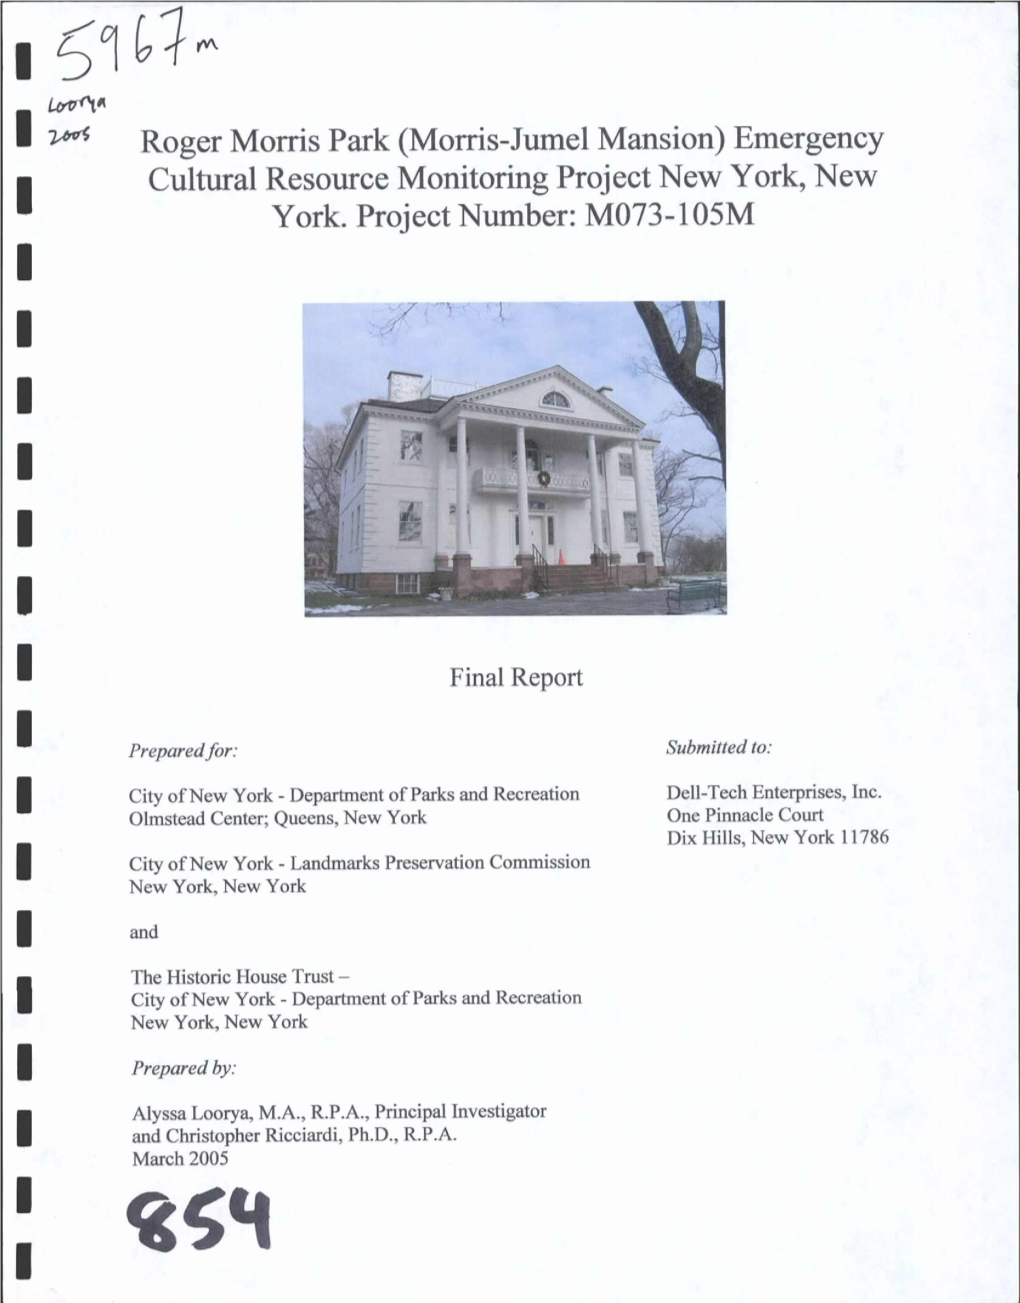 Morris-Jumel Mansion) Emergency Cultural Resource Monitoring Project New York, New York